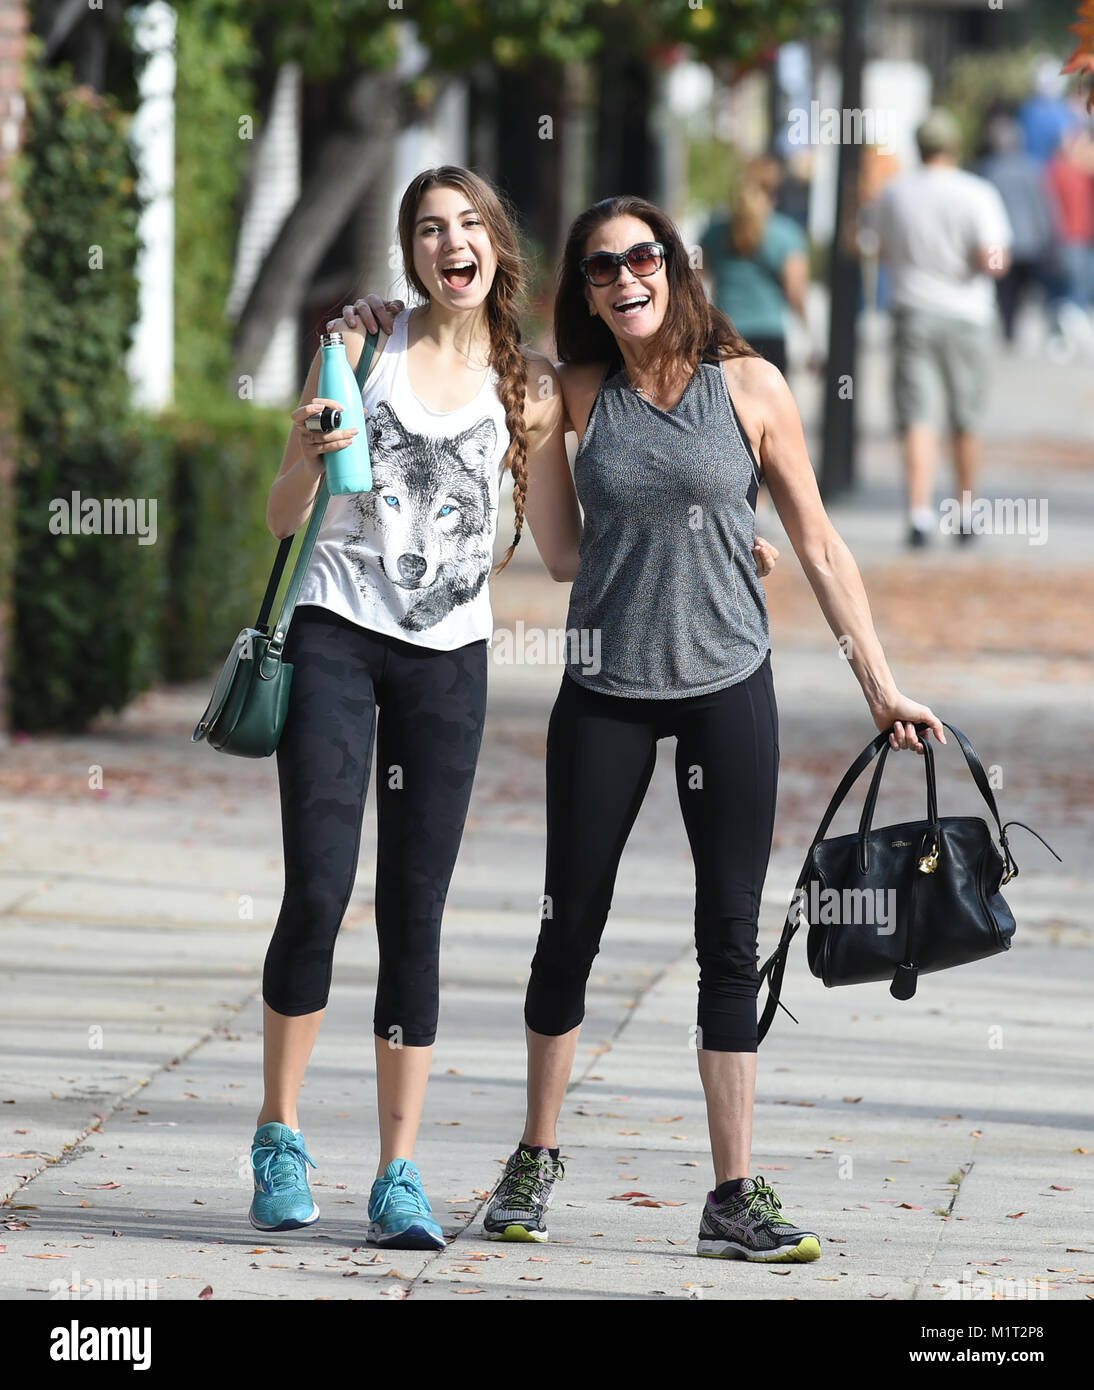 Jeg mistede min vej uberørt renovere Teri Hatcher and her daughter Emerson Tenney leave a gym after working out  on New Year's Day Featuring: Teri Hatcher, Emerson Rose Tenney Where: Los  Angeles, California, United States When: 01 Jan